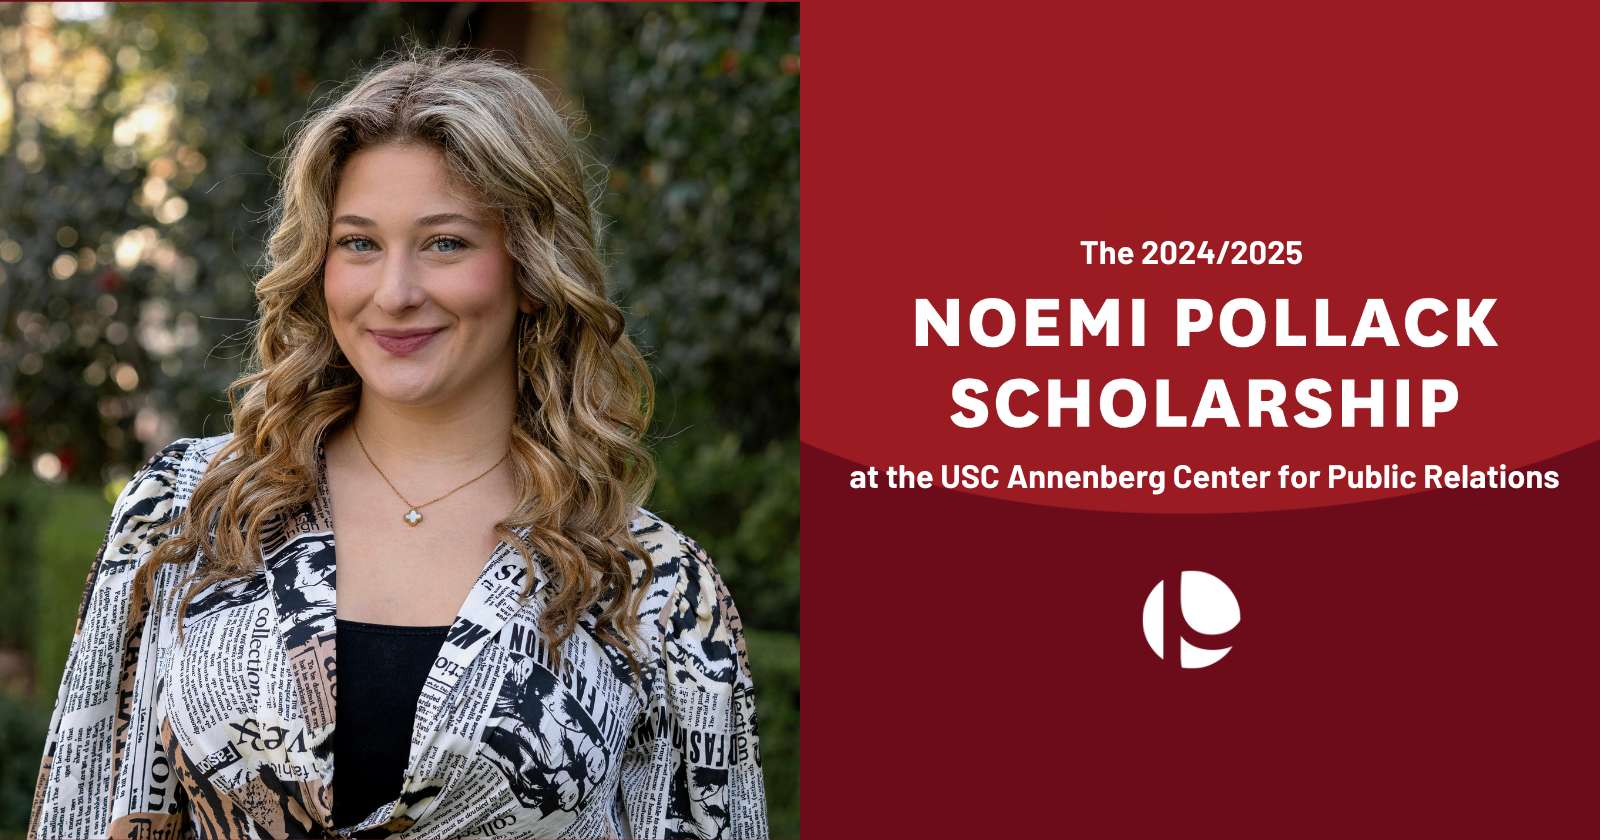 The Noemi Pollack Scholarship, given by USC’s Annenberg annually, was awarded to Sophie Schaked, for the 2024-2025 Academic Year. A Future PR Leader Emerges.